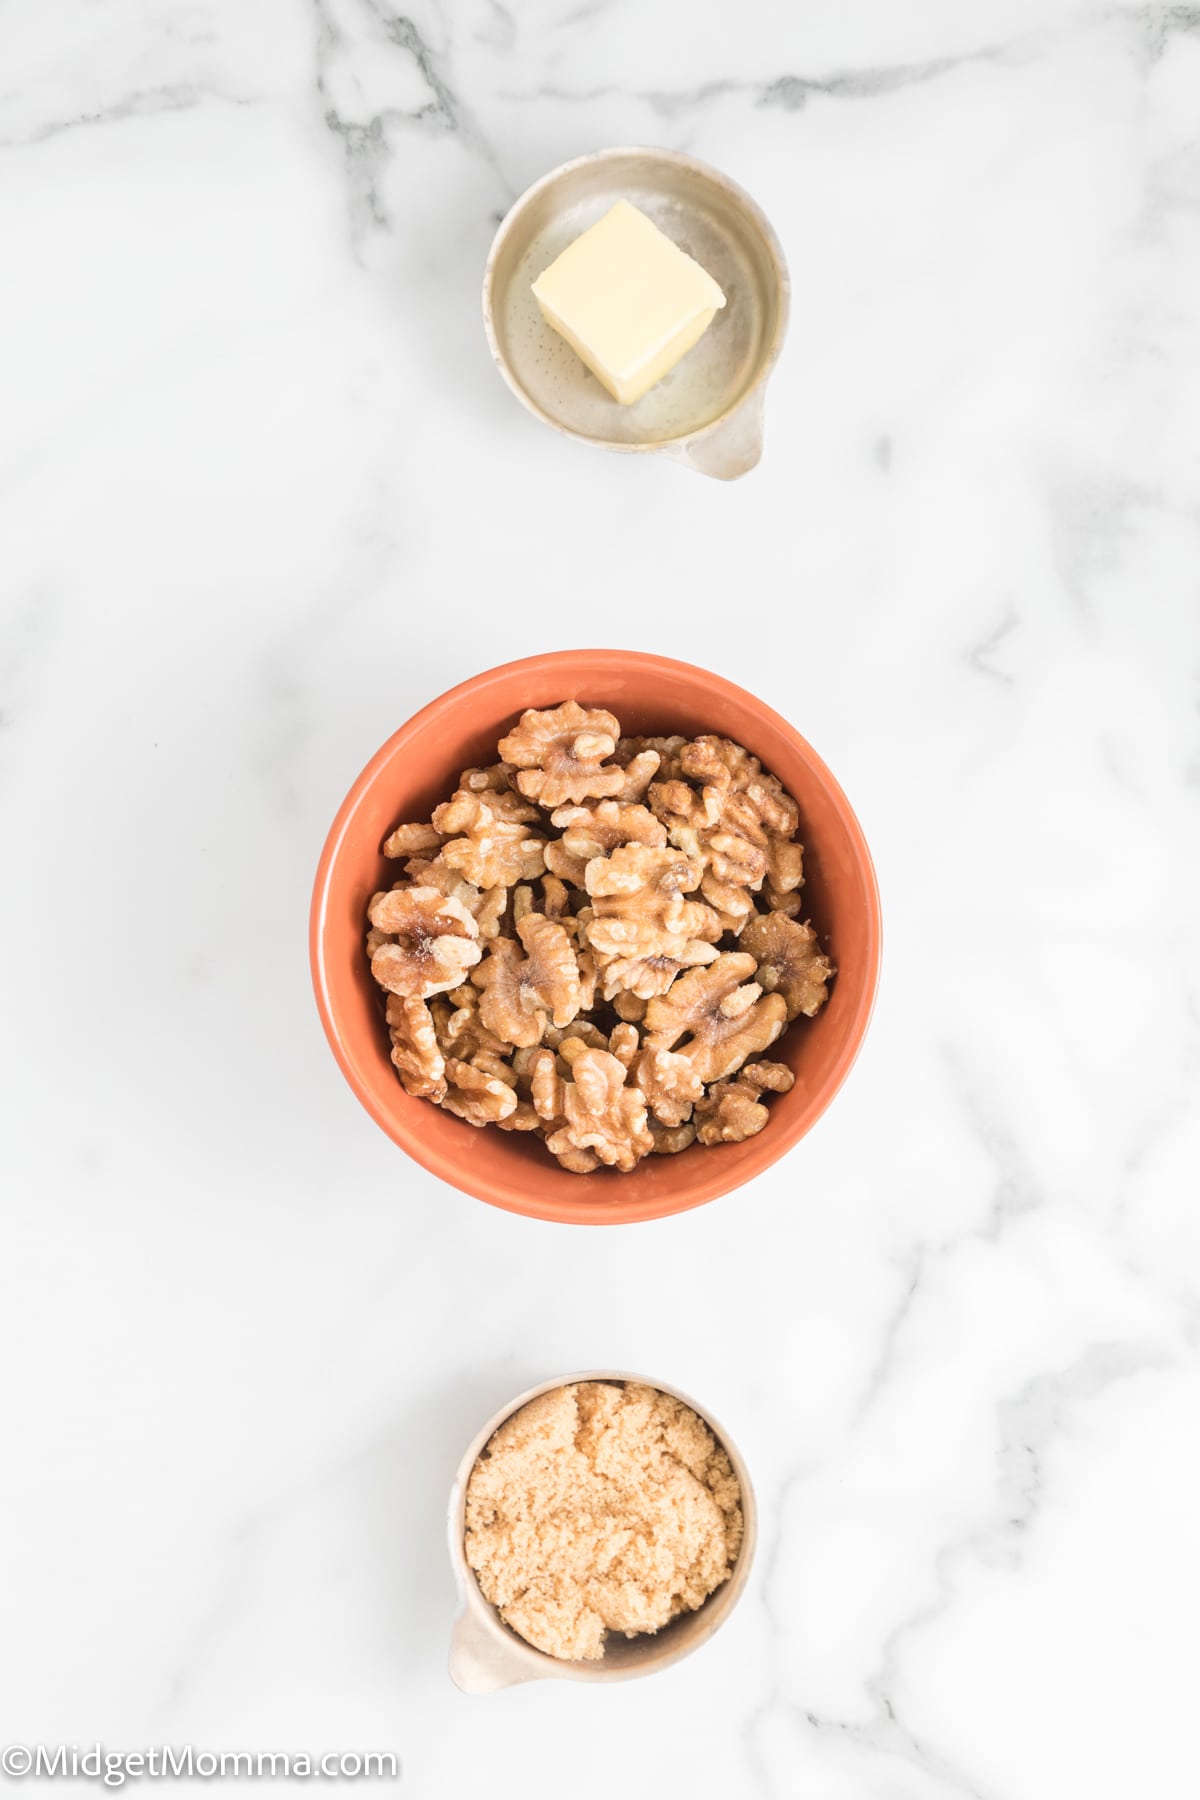 Candied Walnuts Recipe ingredients - butter, brown sugar. and walnuts